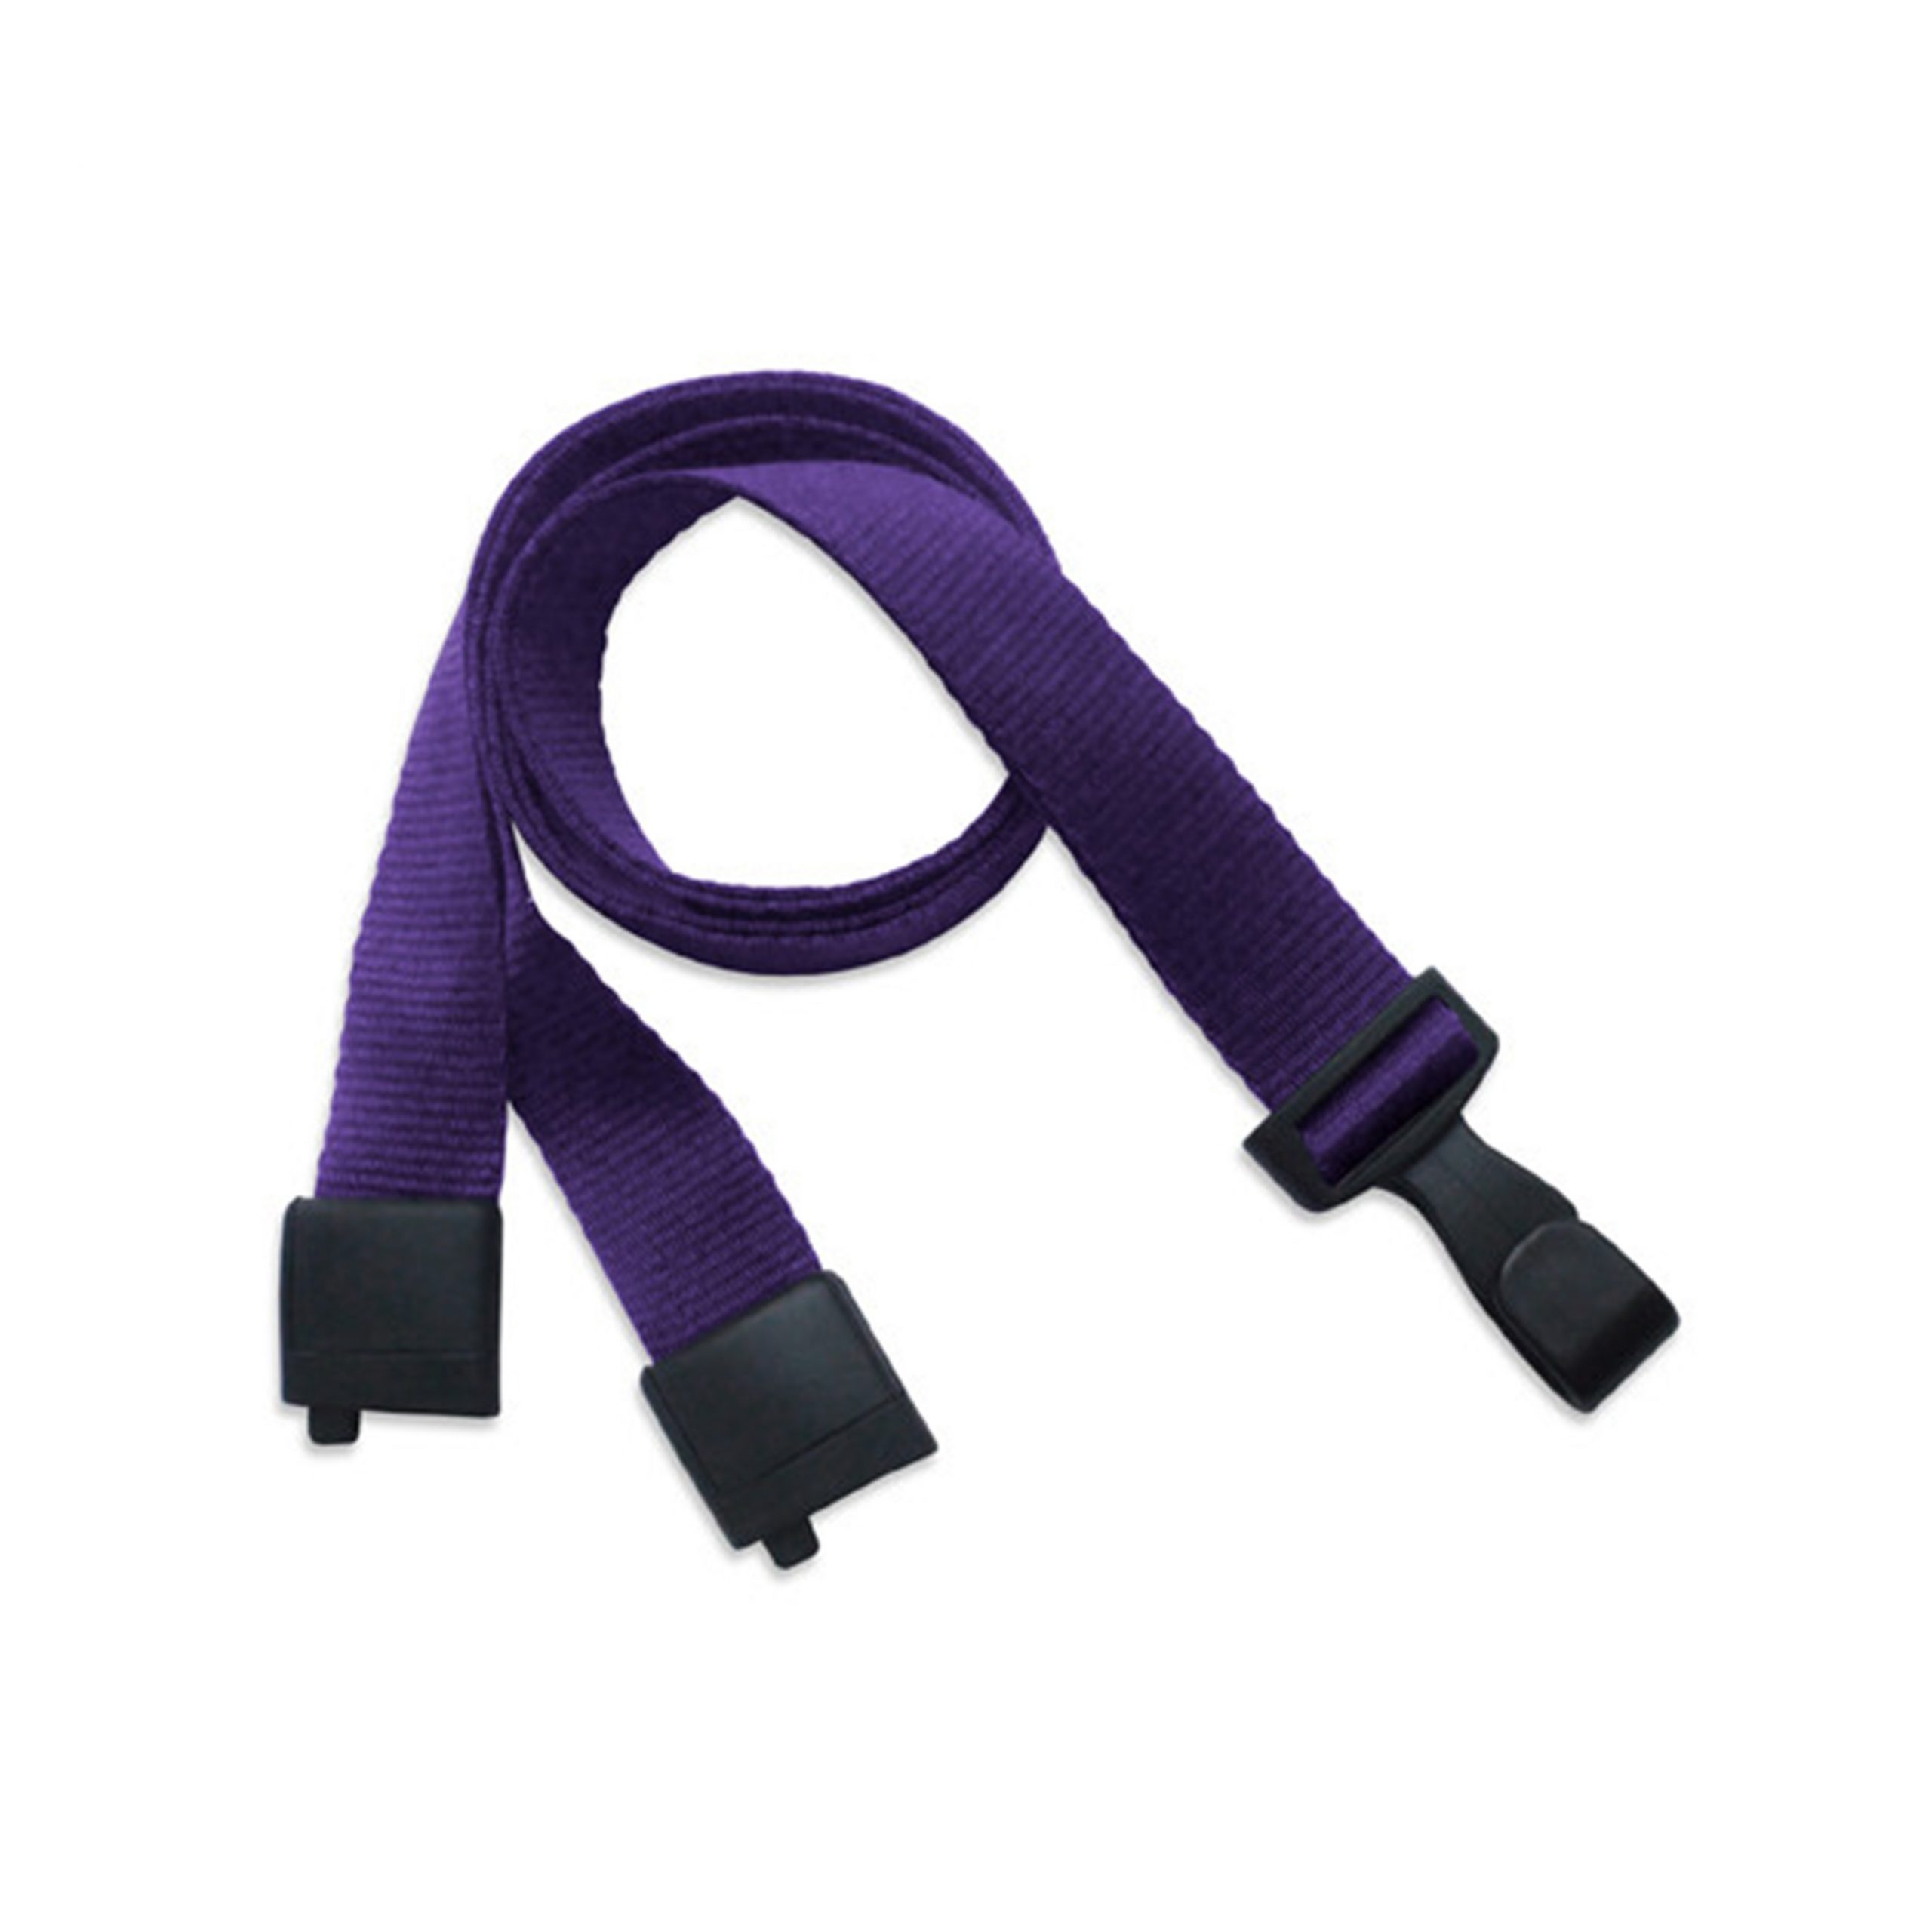 https://store.mybadges.com/ca/wp-content/uploads/2019/11/LANYARDS-BLANK-RECYCLED-BREAKAWAY-PLASTIC-HOOK-PURPLE-A-9R-PUR-scaled.jpg